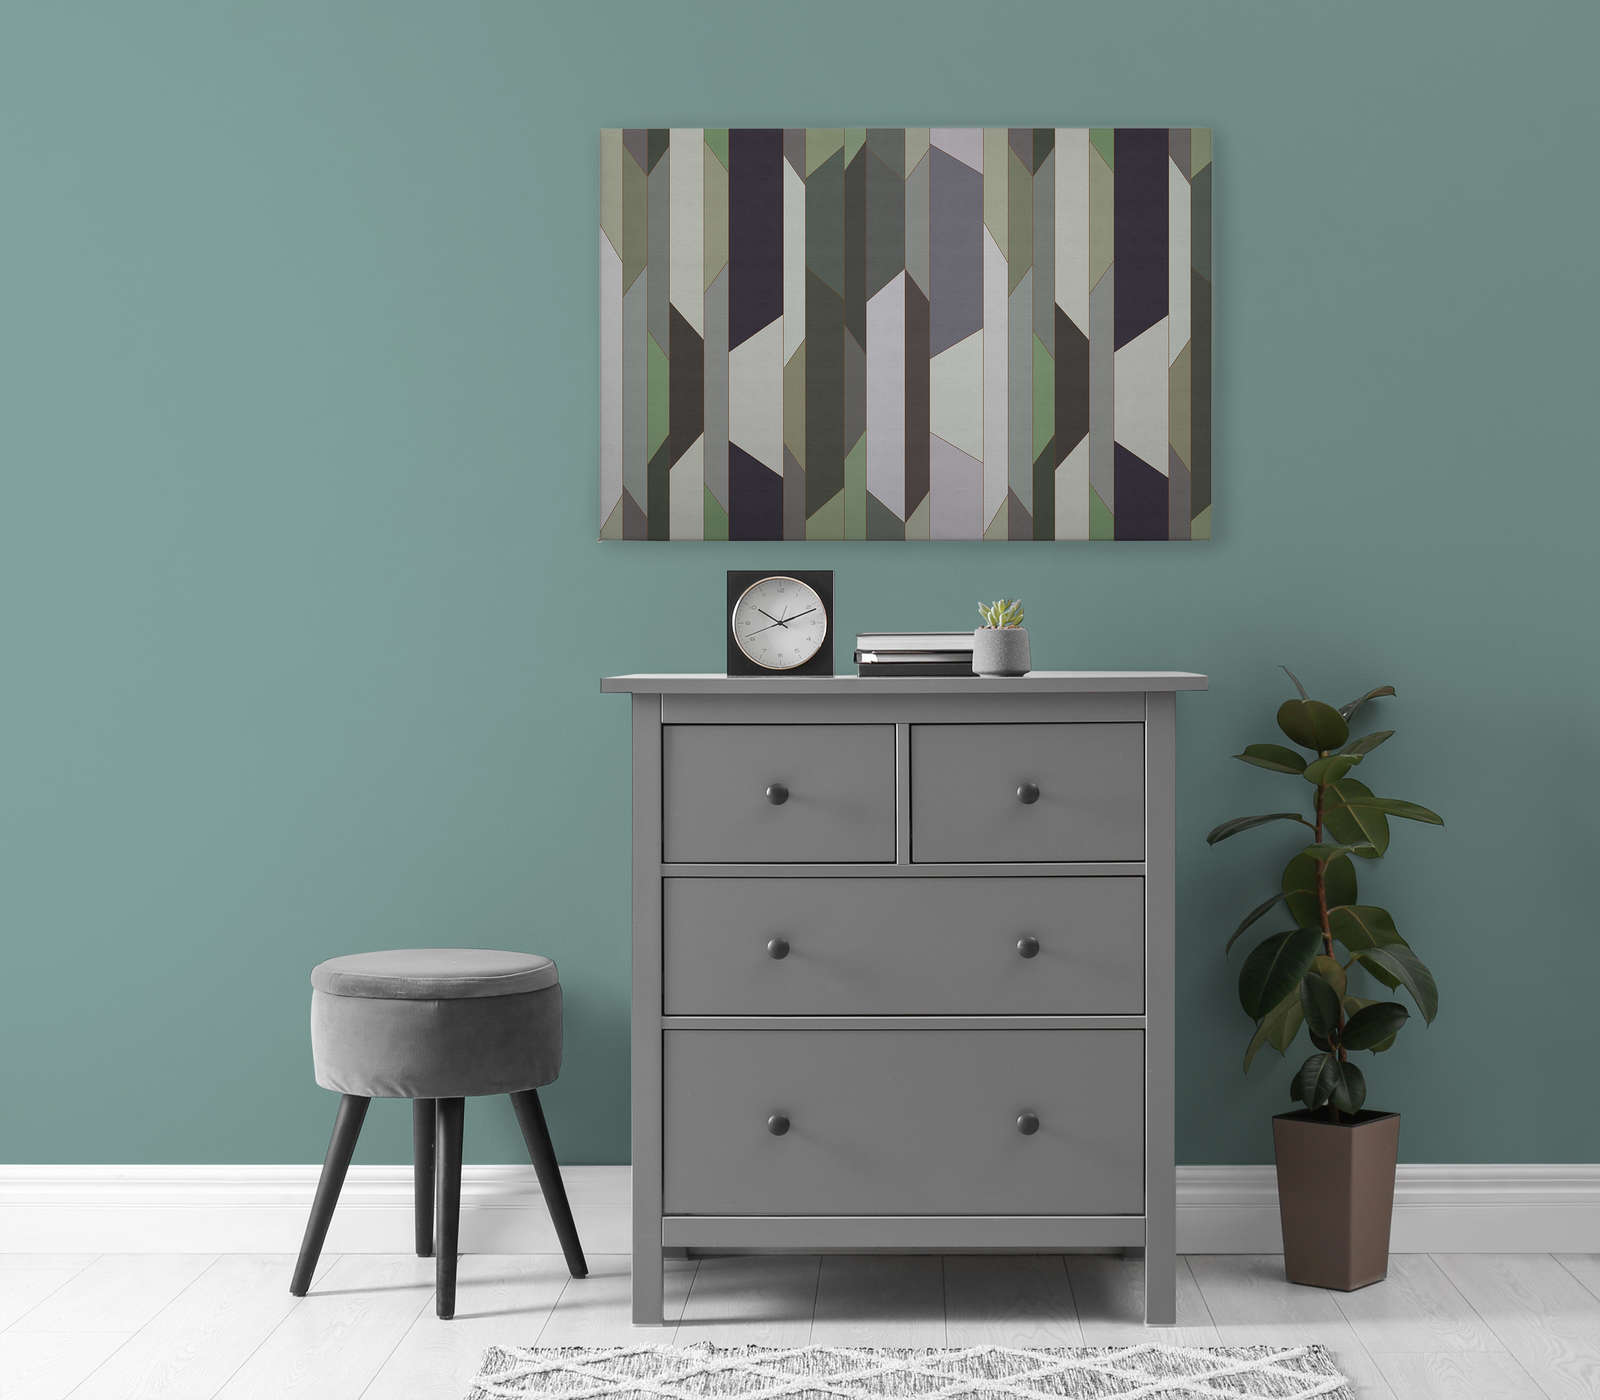             Fold 1 - Canvas painting with retro style stripe design - 0.90 m x 0.60 m
        